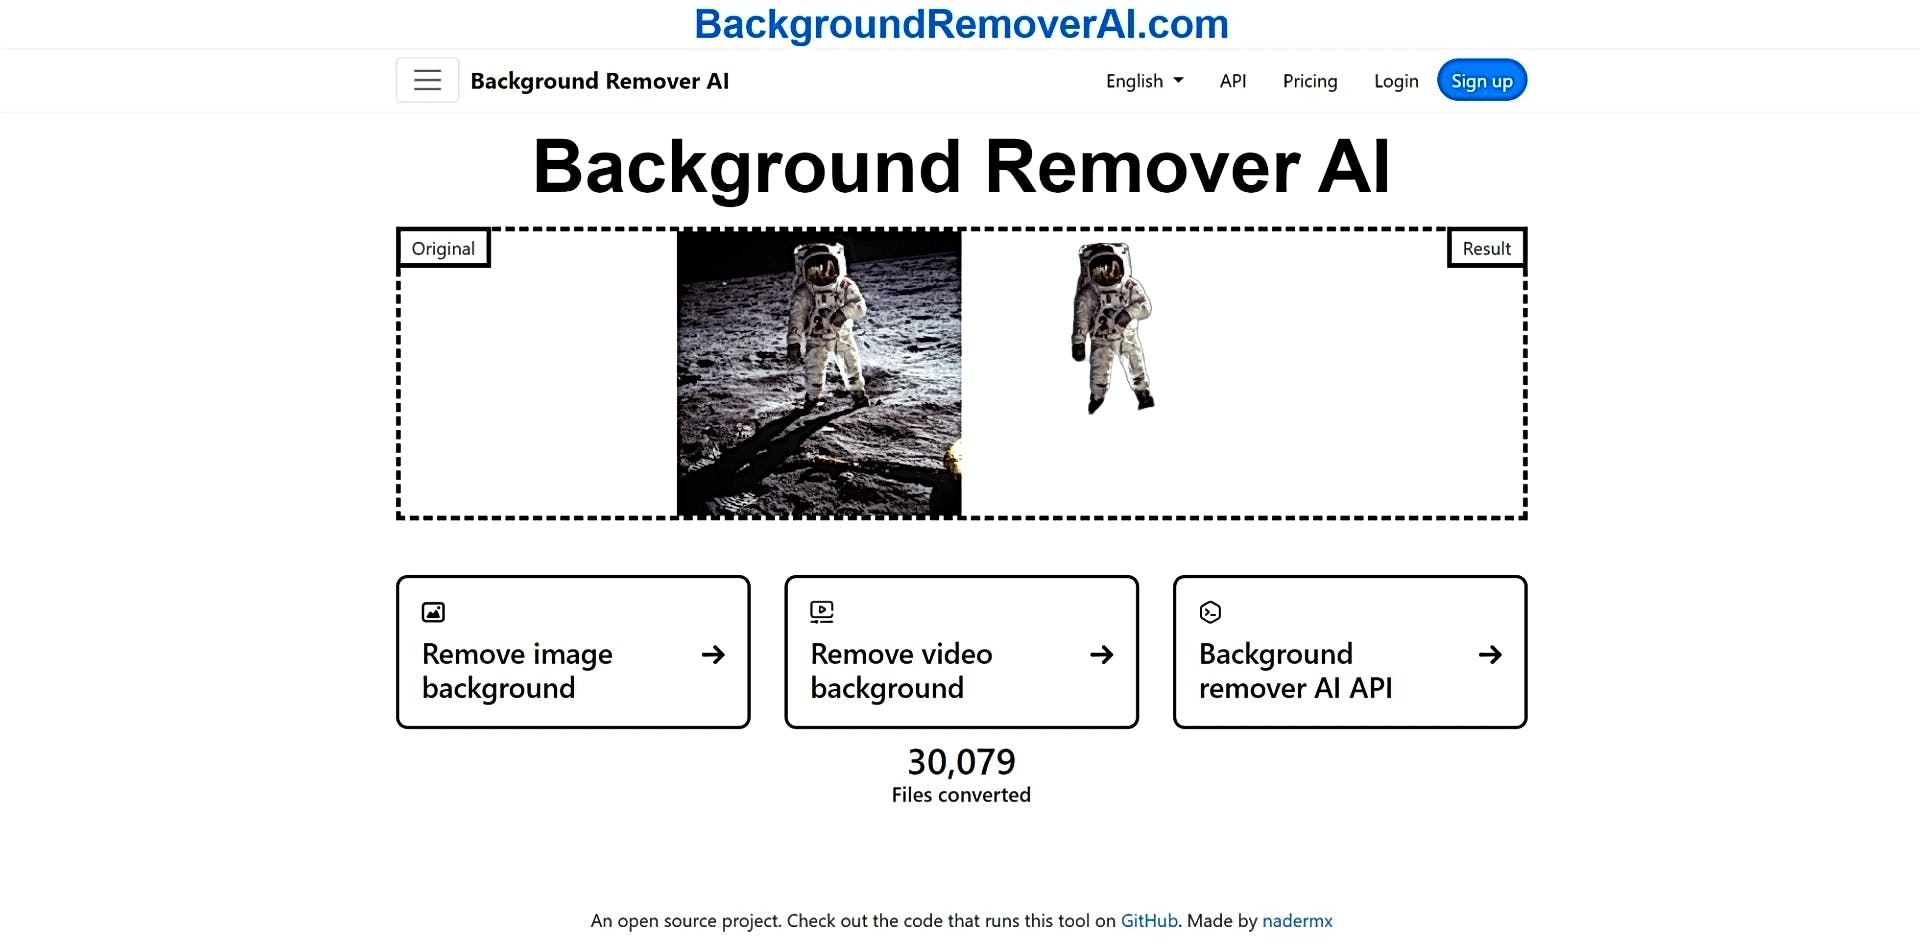 Background Remover AI featured